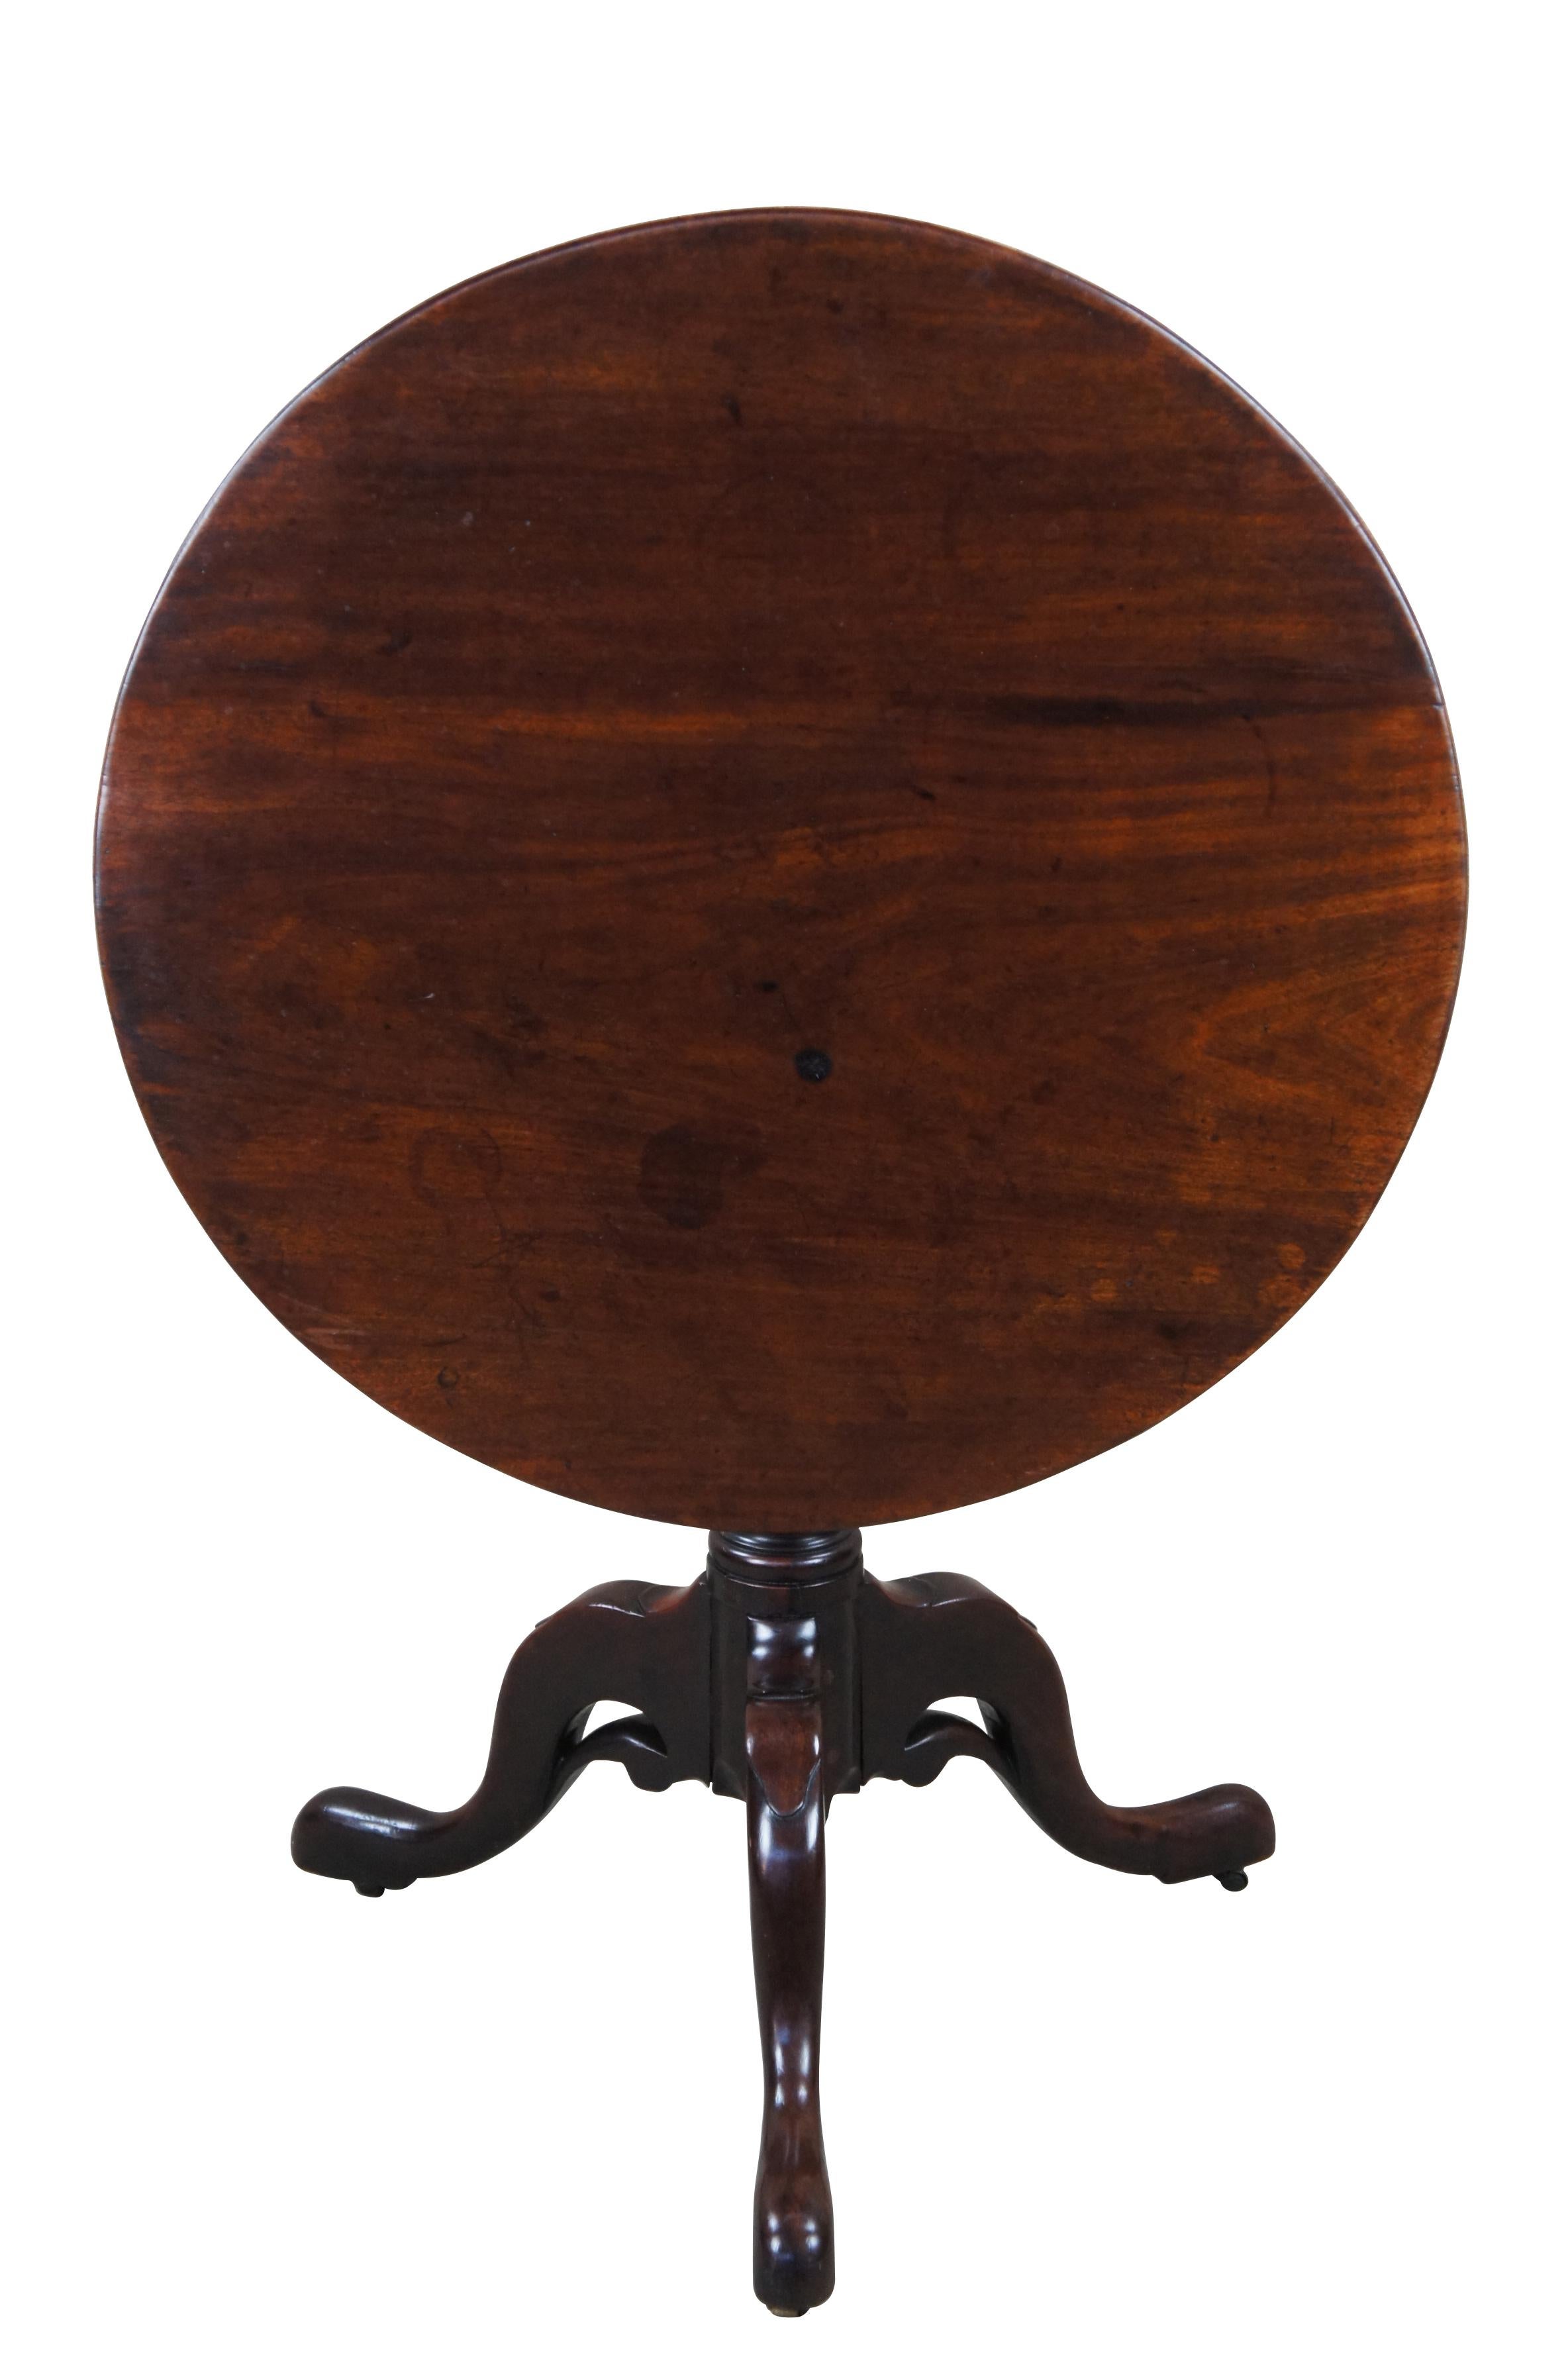 Rare English antique 18th century Georgian tilt top birdcage pedestal tea table.  Made of mahogany featuring round tilt top supported by tri leg base with unique downswept pierced accent, queen anne slipper feet and petite casters. 